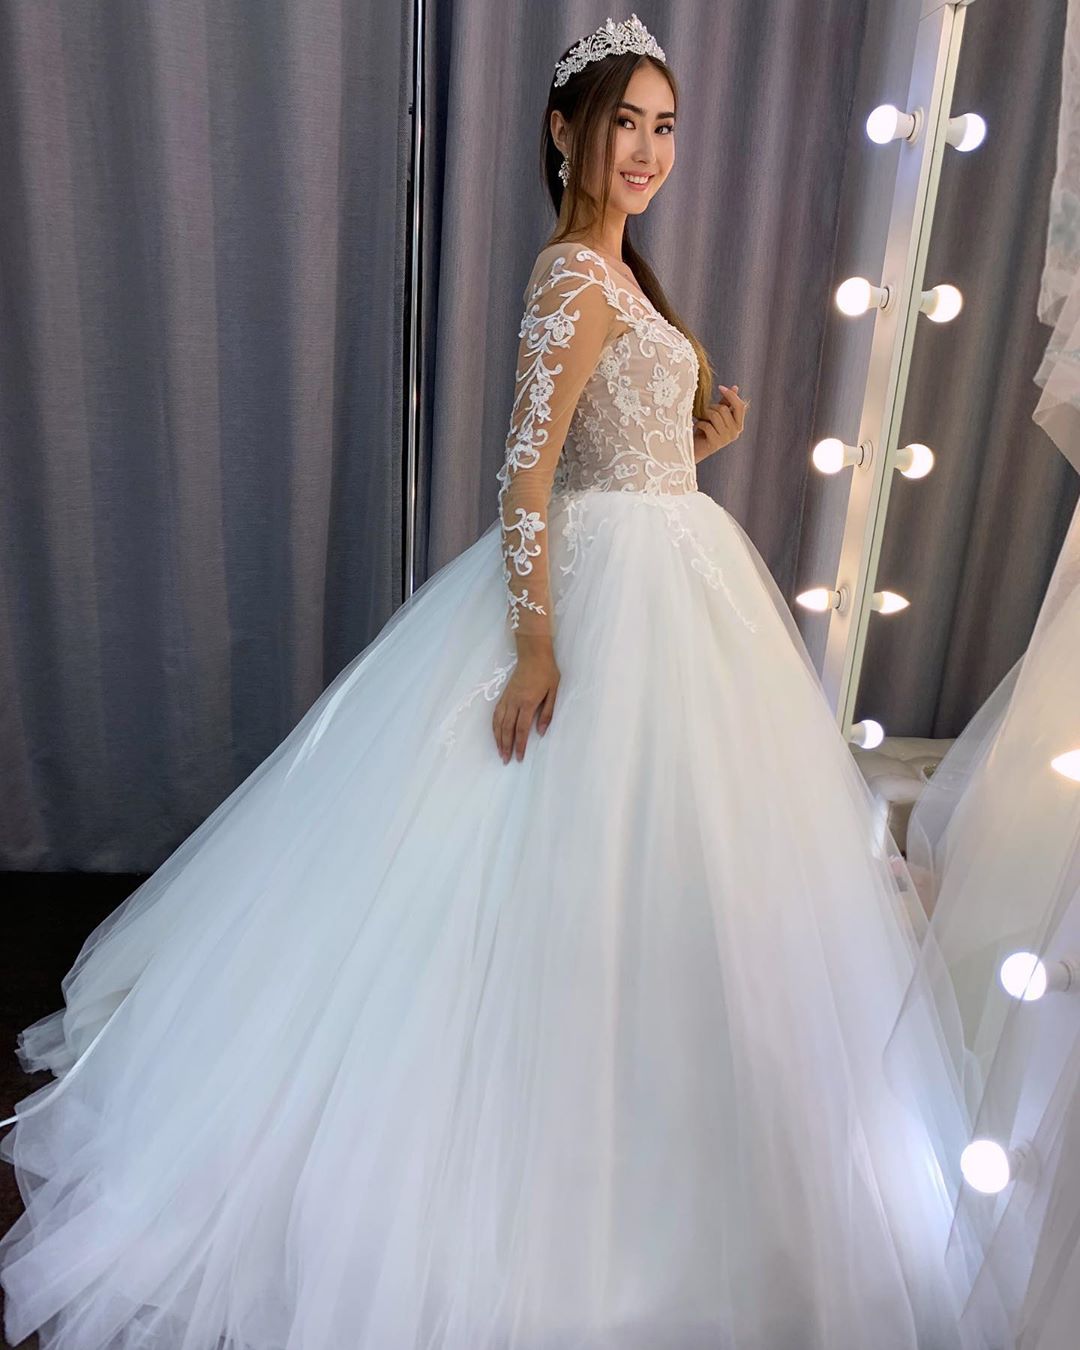 Gorgeous Long A-line Tulle Lace Wedding Dress with Sleeves-BIZTUNNEL